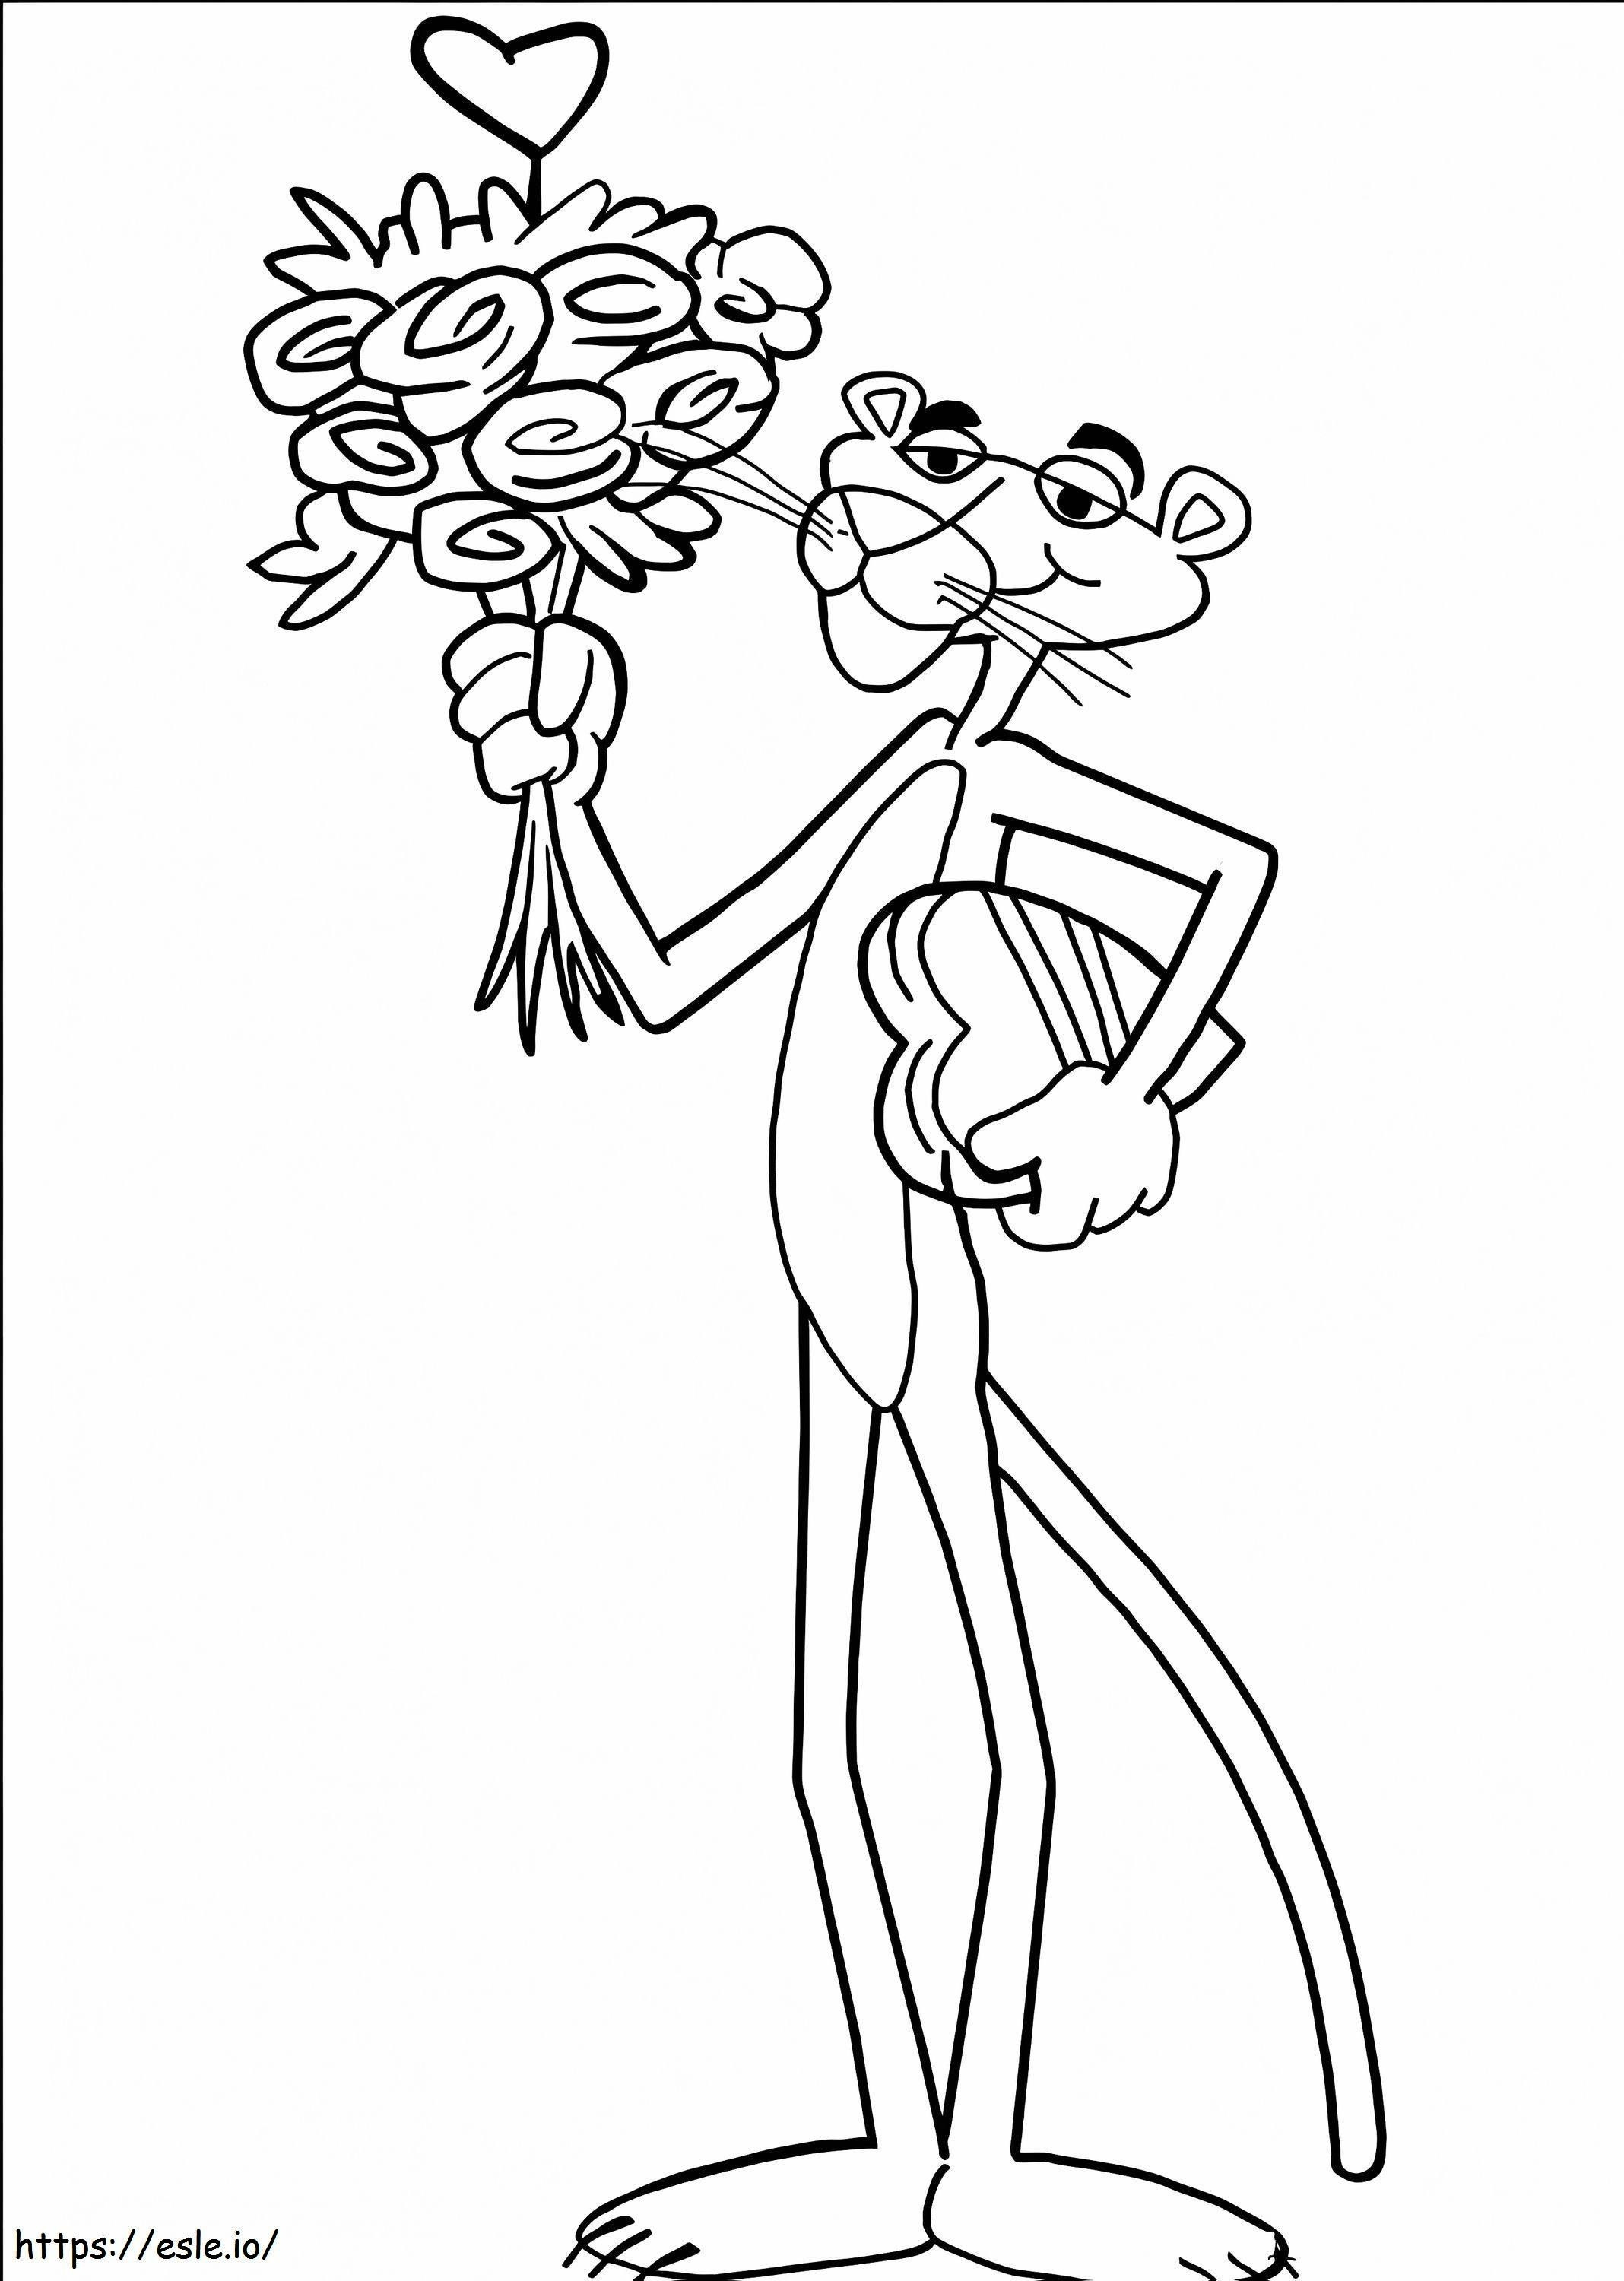 Love Pink Panther coloring page